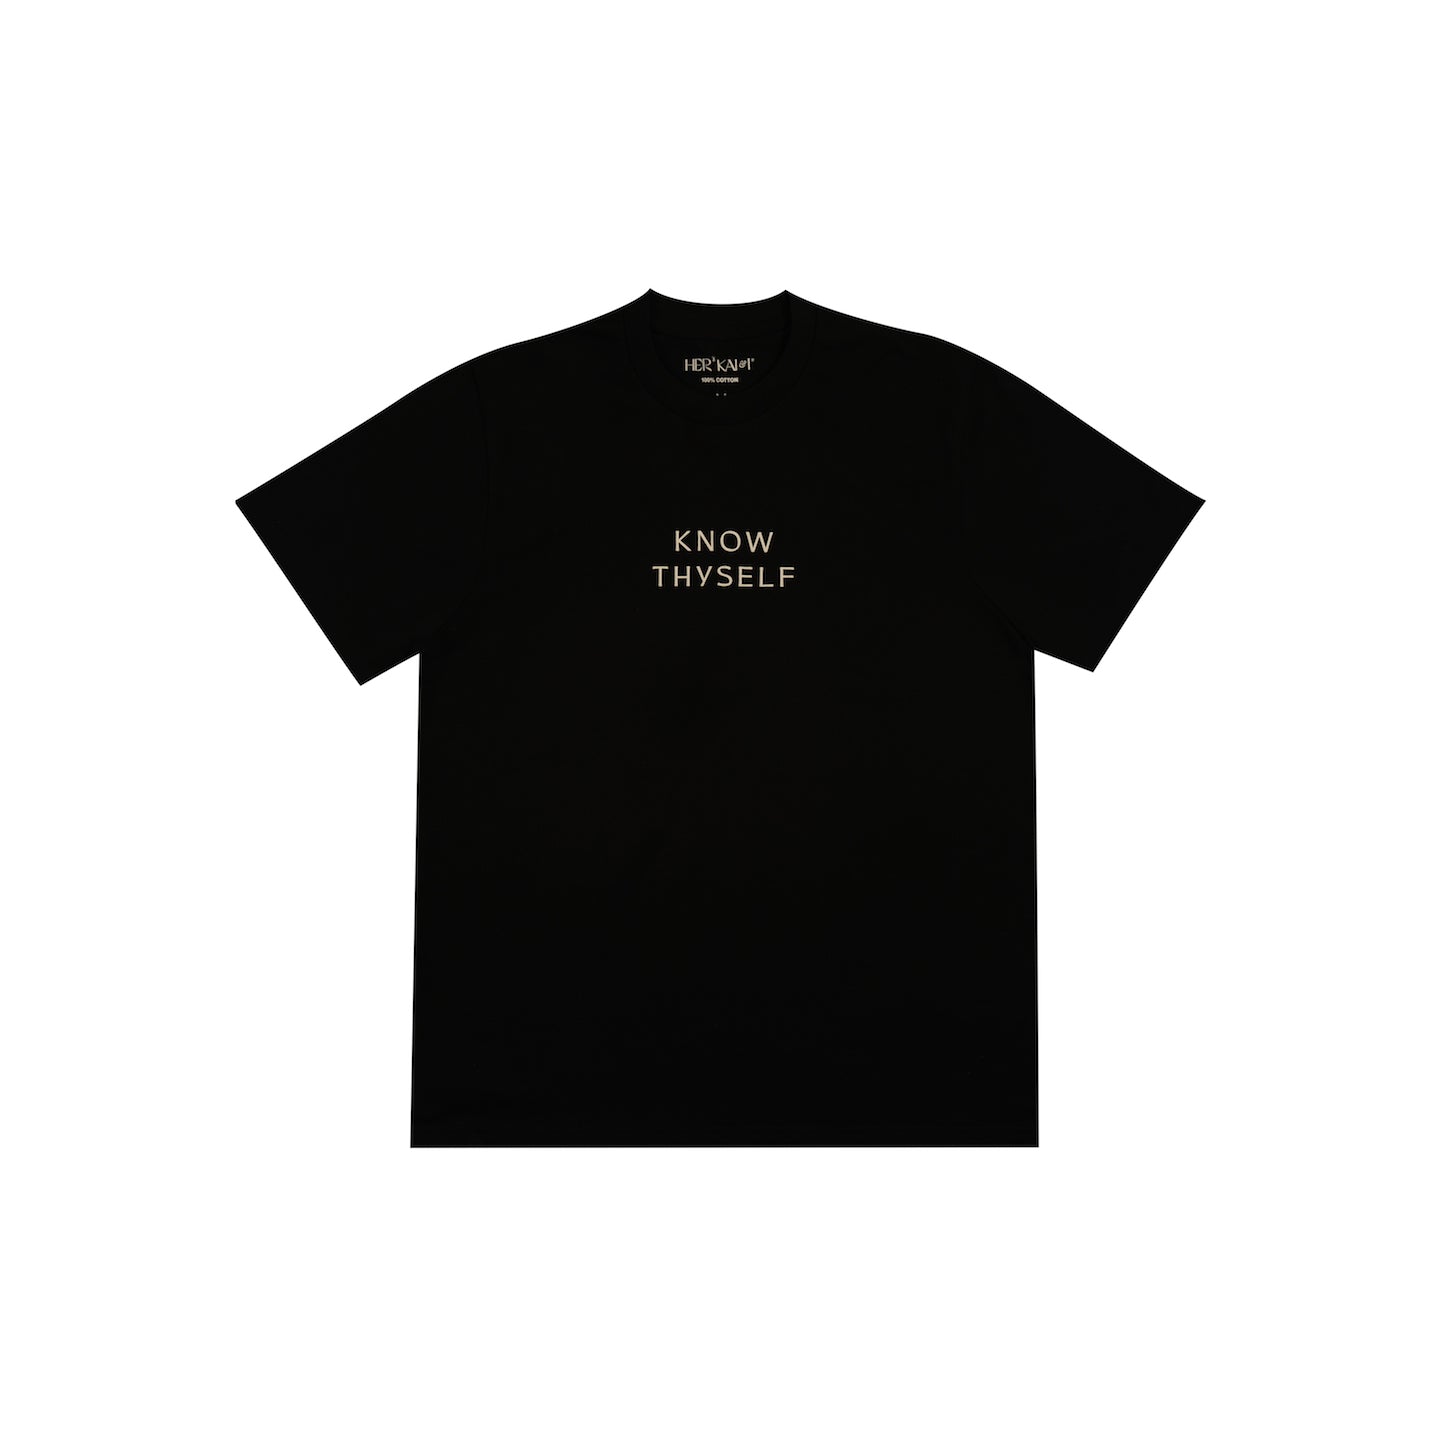 KNOW THYSELF T-SHIRT BY HER KAI & I IN BLACK BEAUTY COLOR